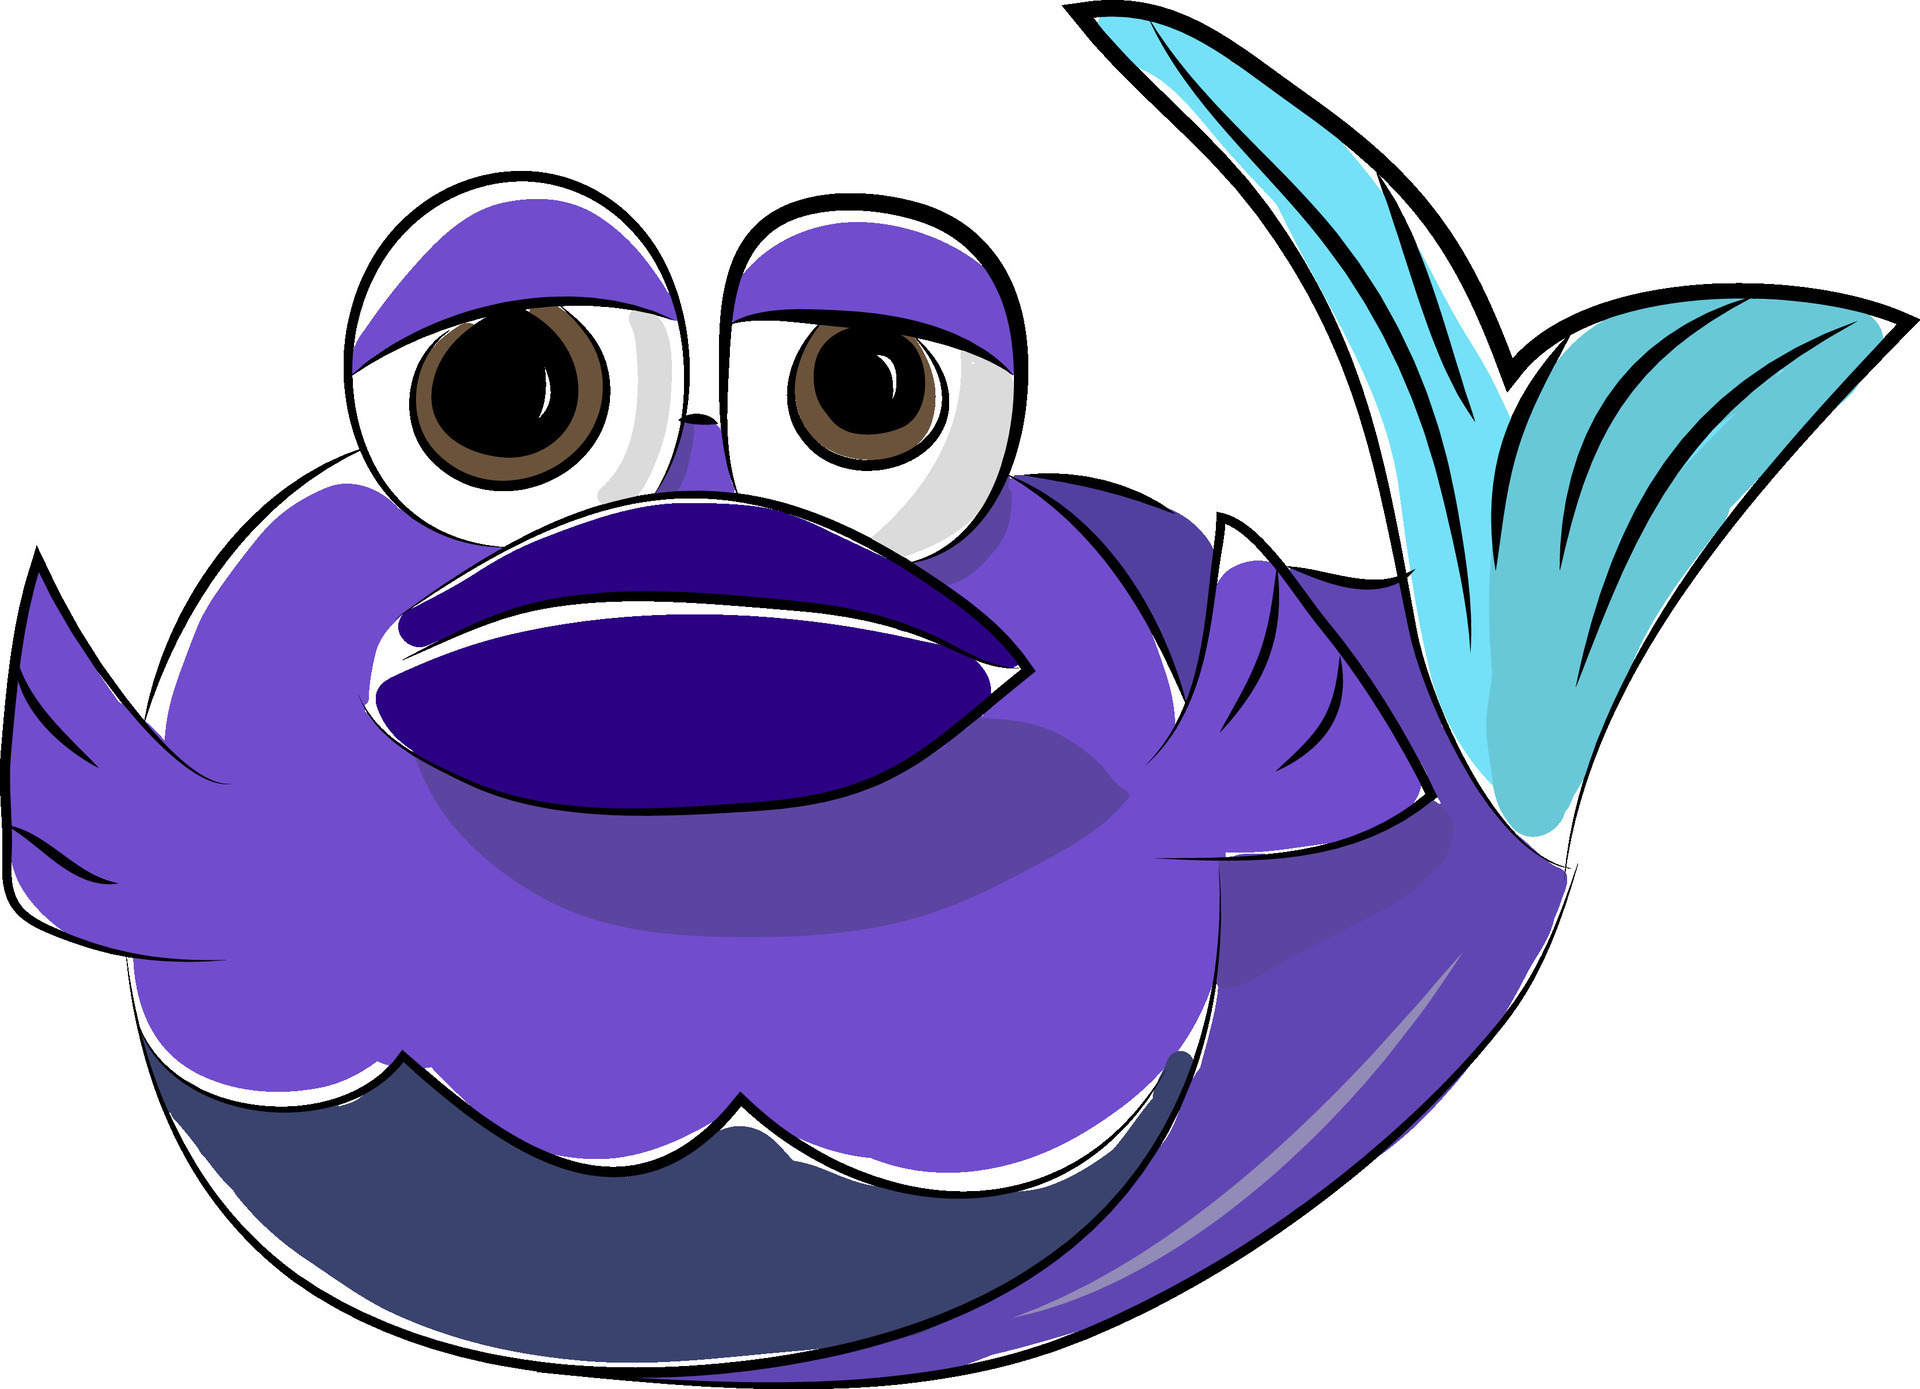 Drawing of a cute blue color fish with big round eyes and flat